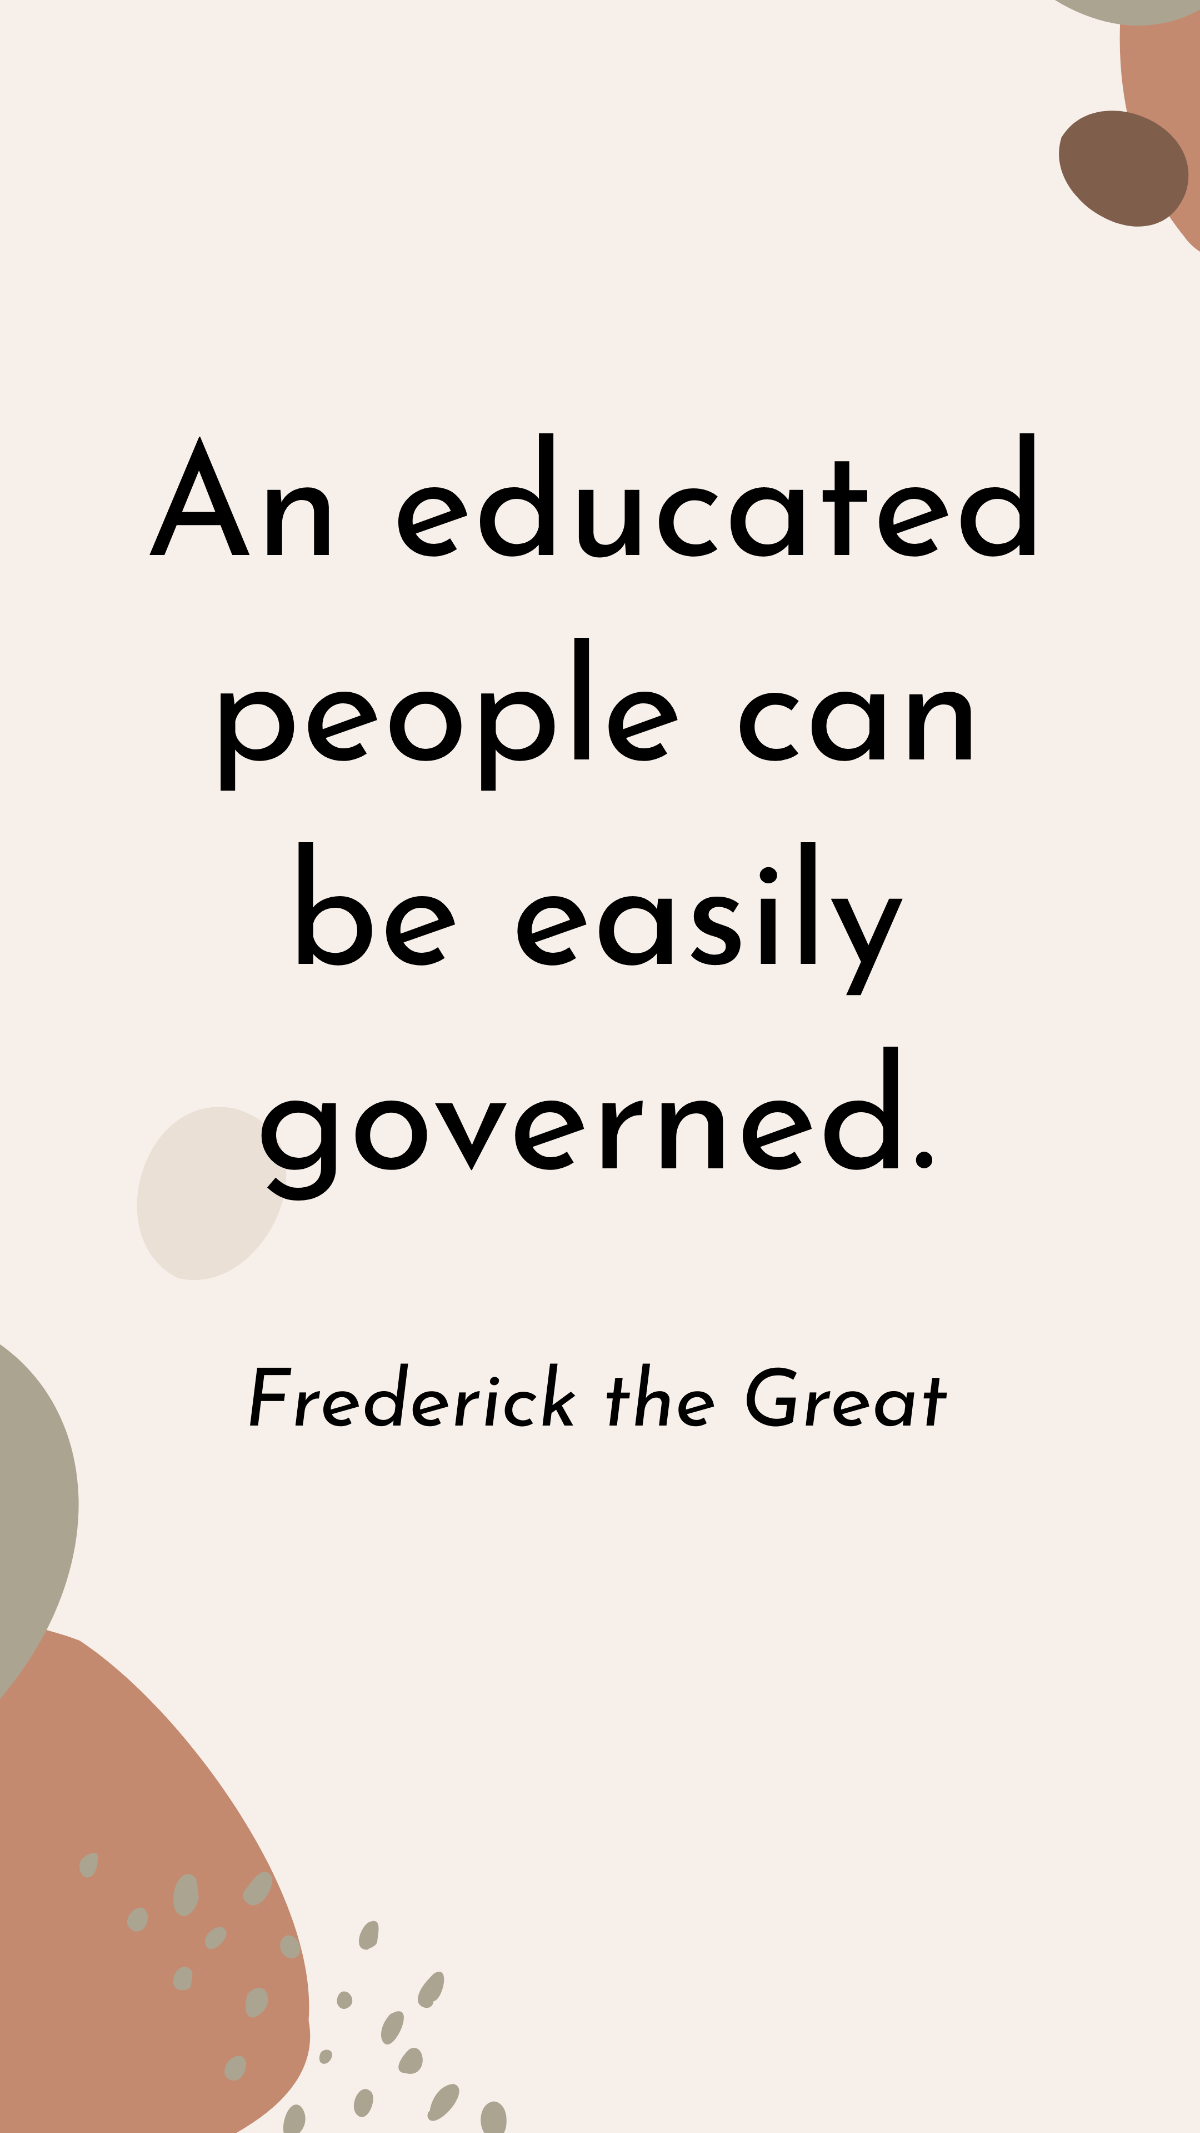 Free Frederick the Great - An educated people can be easily governed. Template